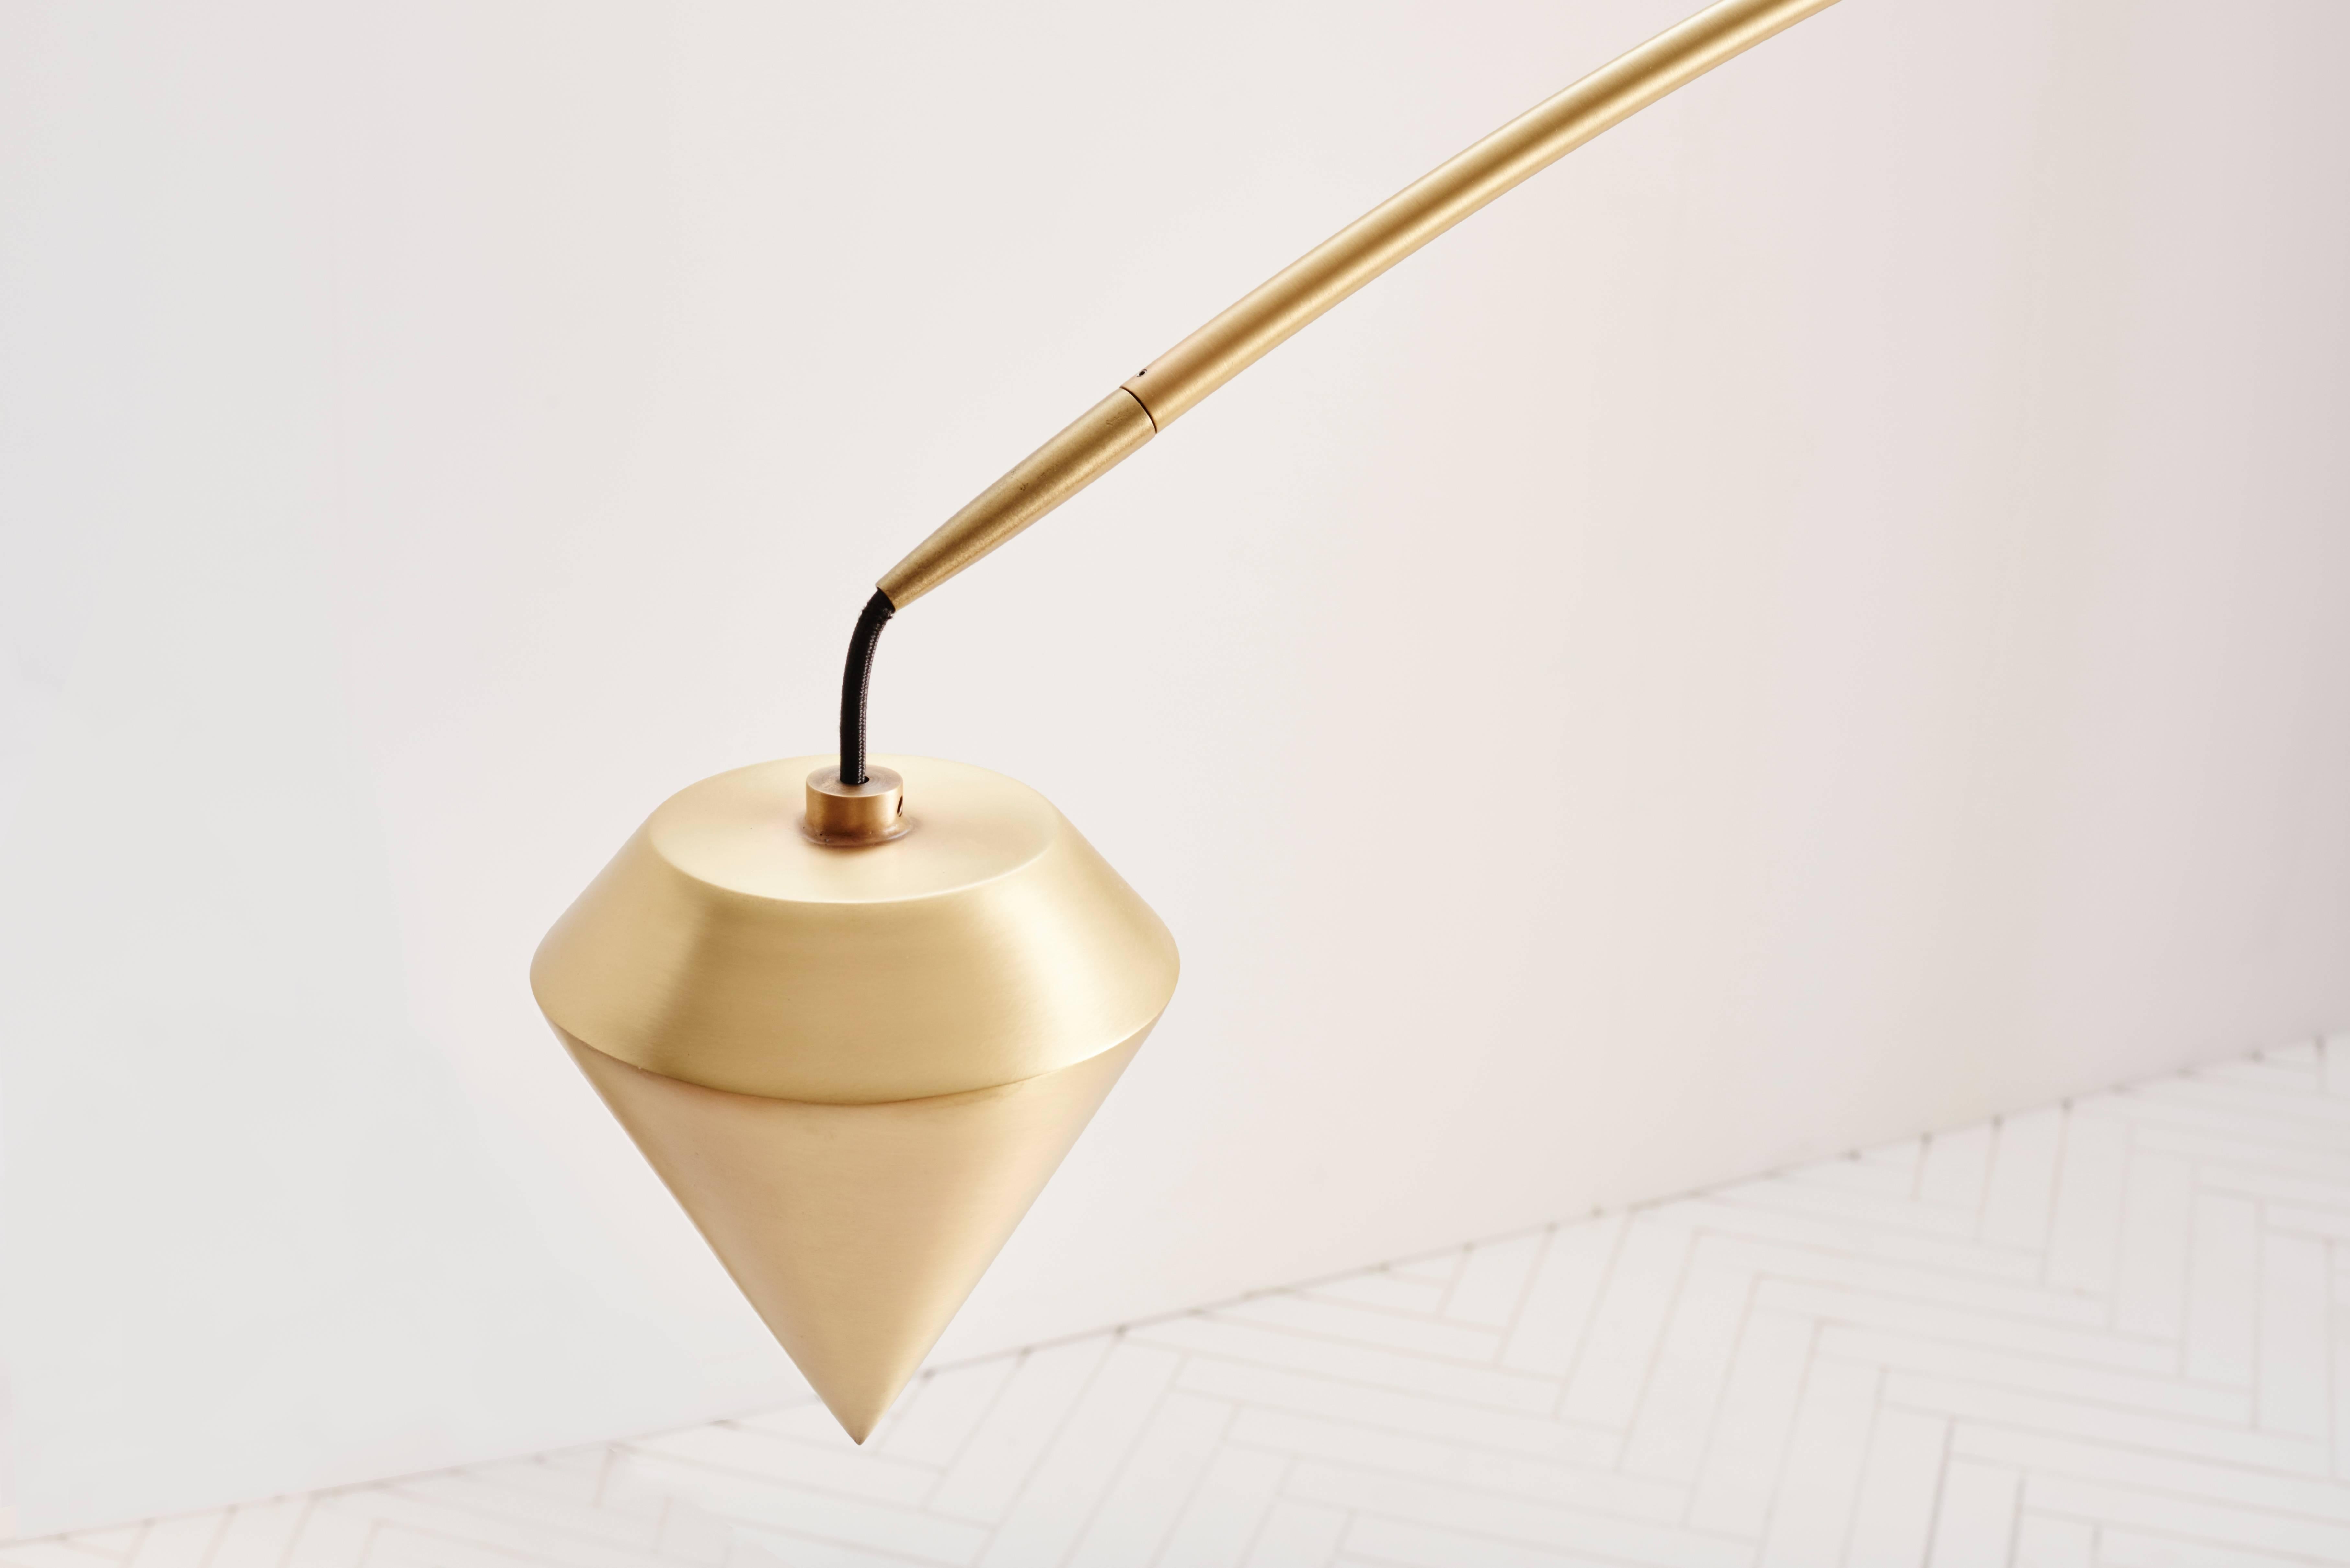 Comprised of a beautifully tapered arc held in perfect balance by a white glass orb and our signature large plumb weight. Available in brushed brass and oil-rubbed bronze (a rich warm black).

Custom sizes can be accommodated. Please note lead times